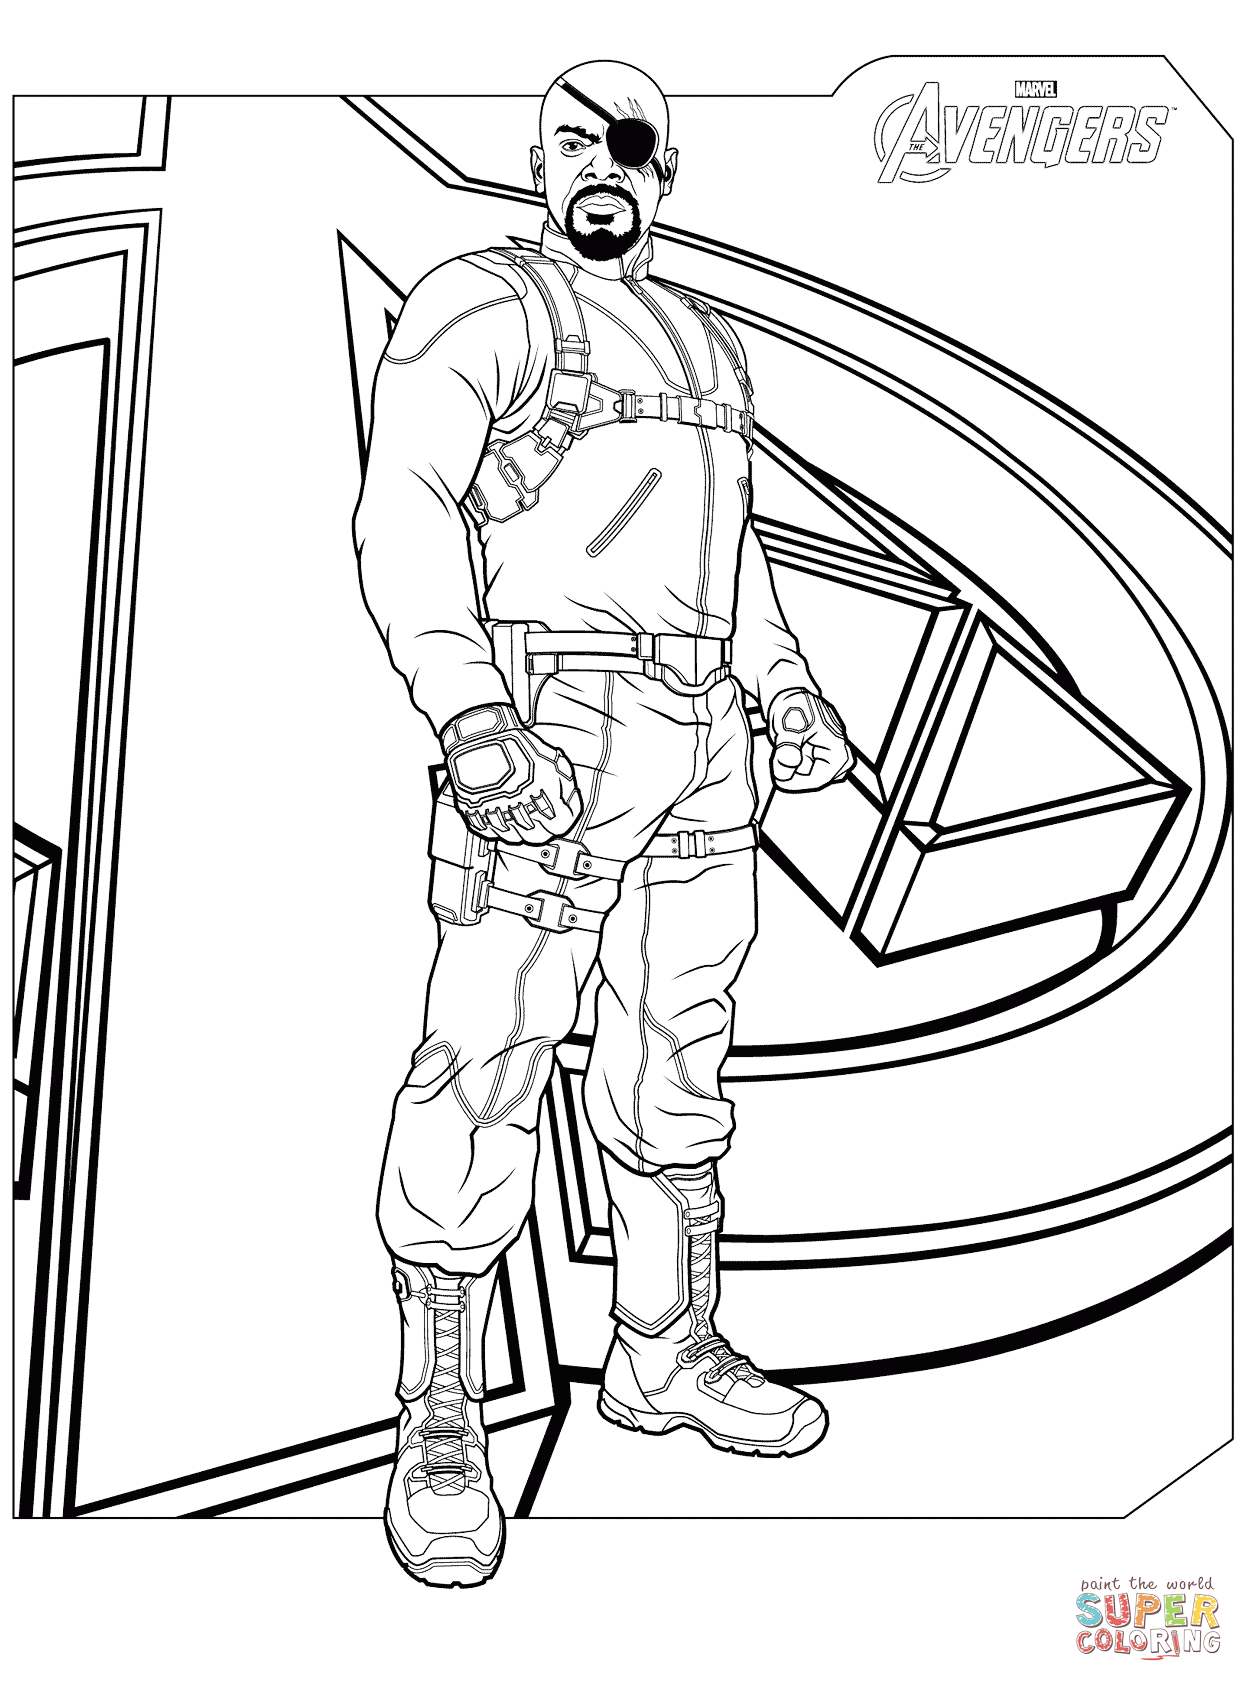 Avengers Nick Fury coloring page | Free Printable Coloring Pages